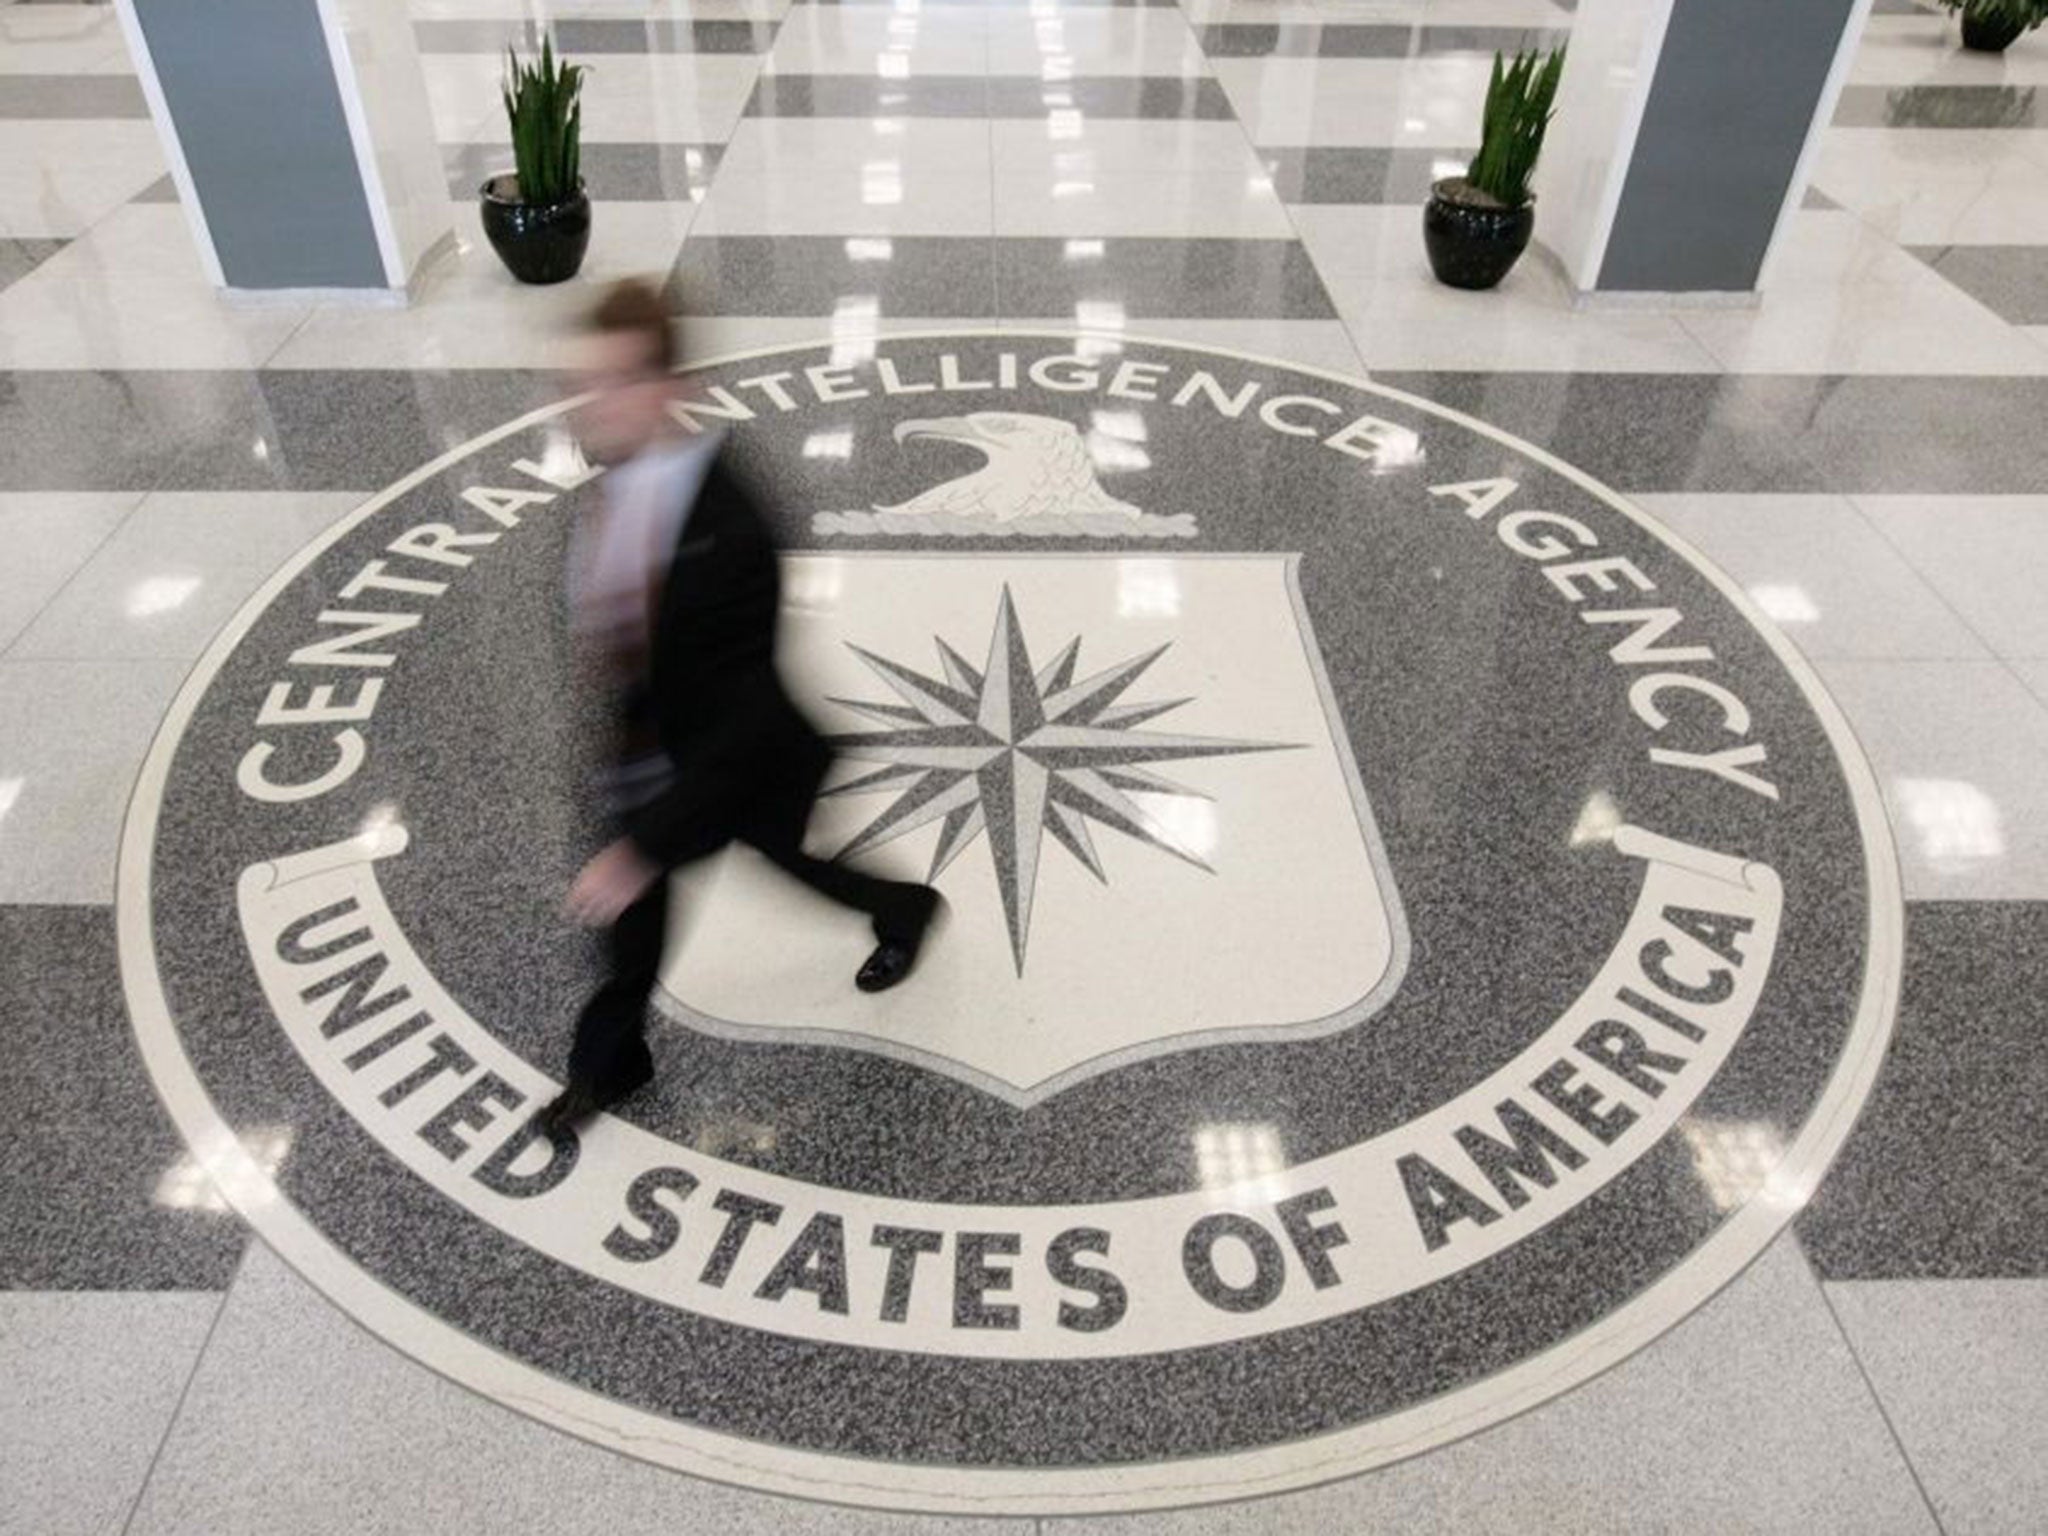 The lobby of the CIA Headquarters building in McLean, Virginia